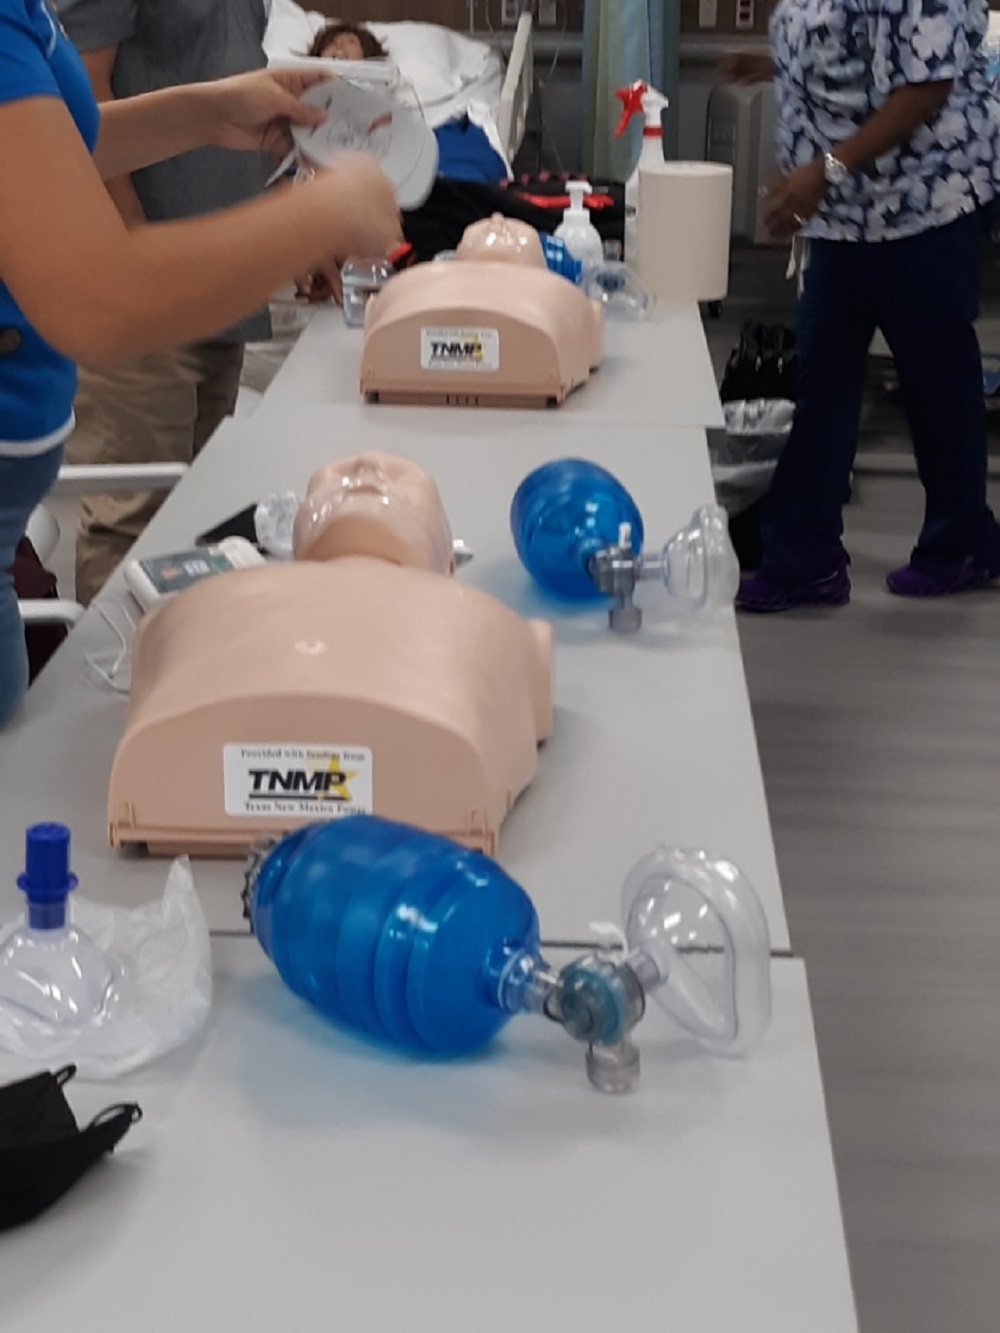 CPR students practice on new training mannequins provided by funding through Texas New Mexico Power.